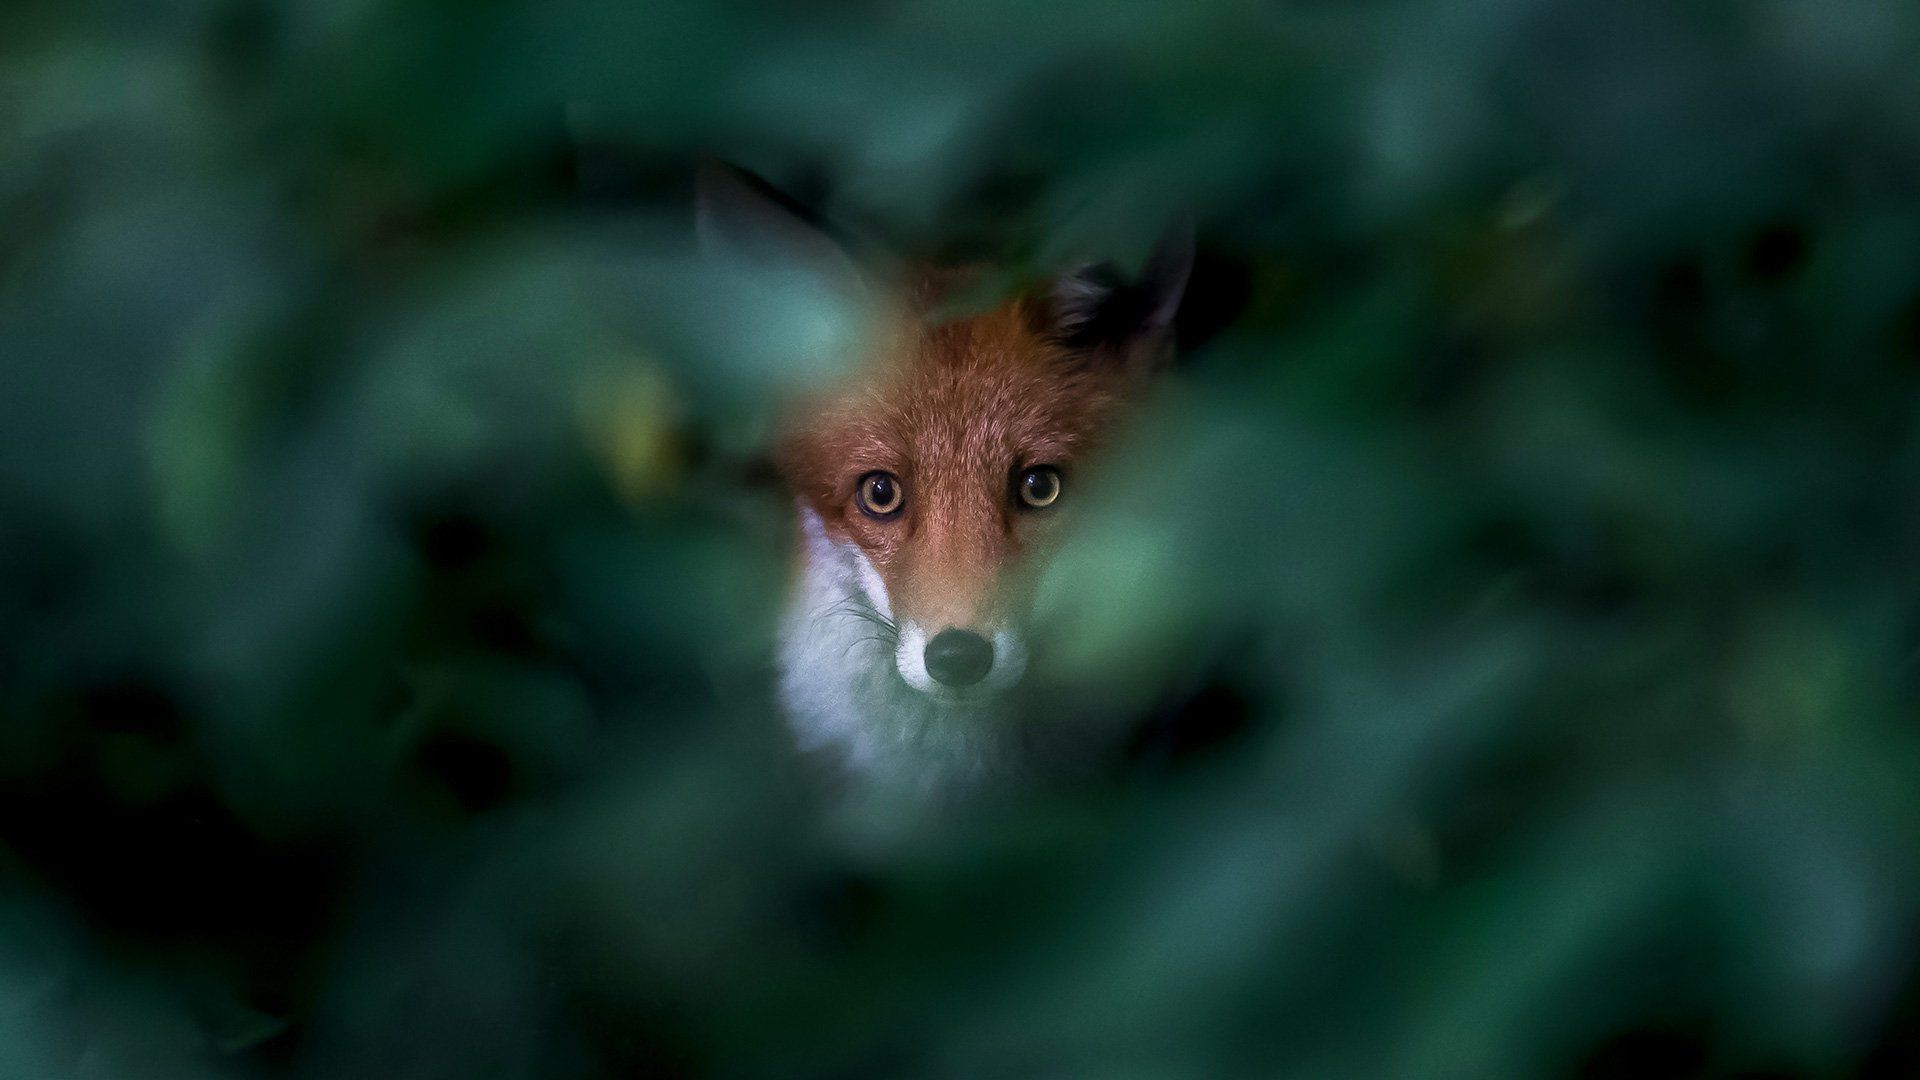 Ossi Saarinen's urban nature photography story: a fox stares at us through a gap in a bush, which is out of focus.